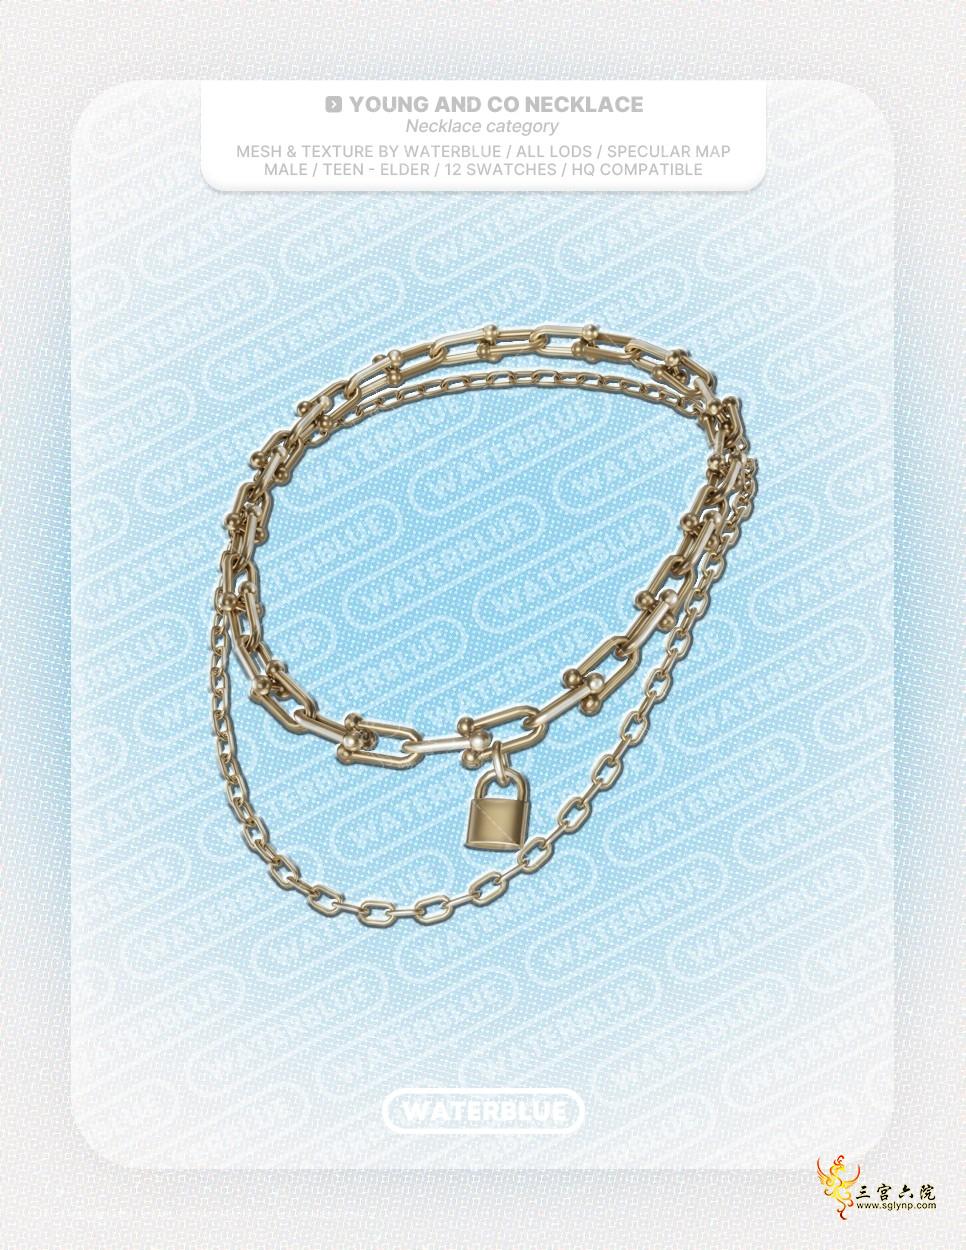 youngandco necklace1.png